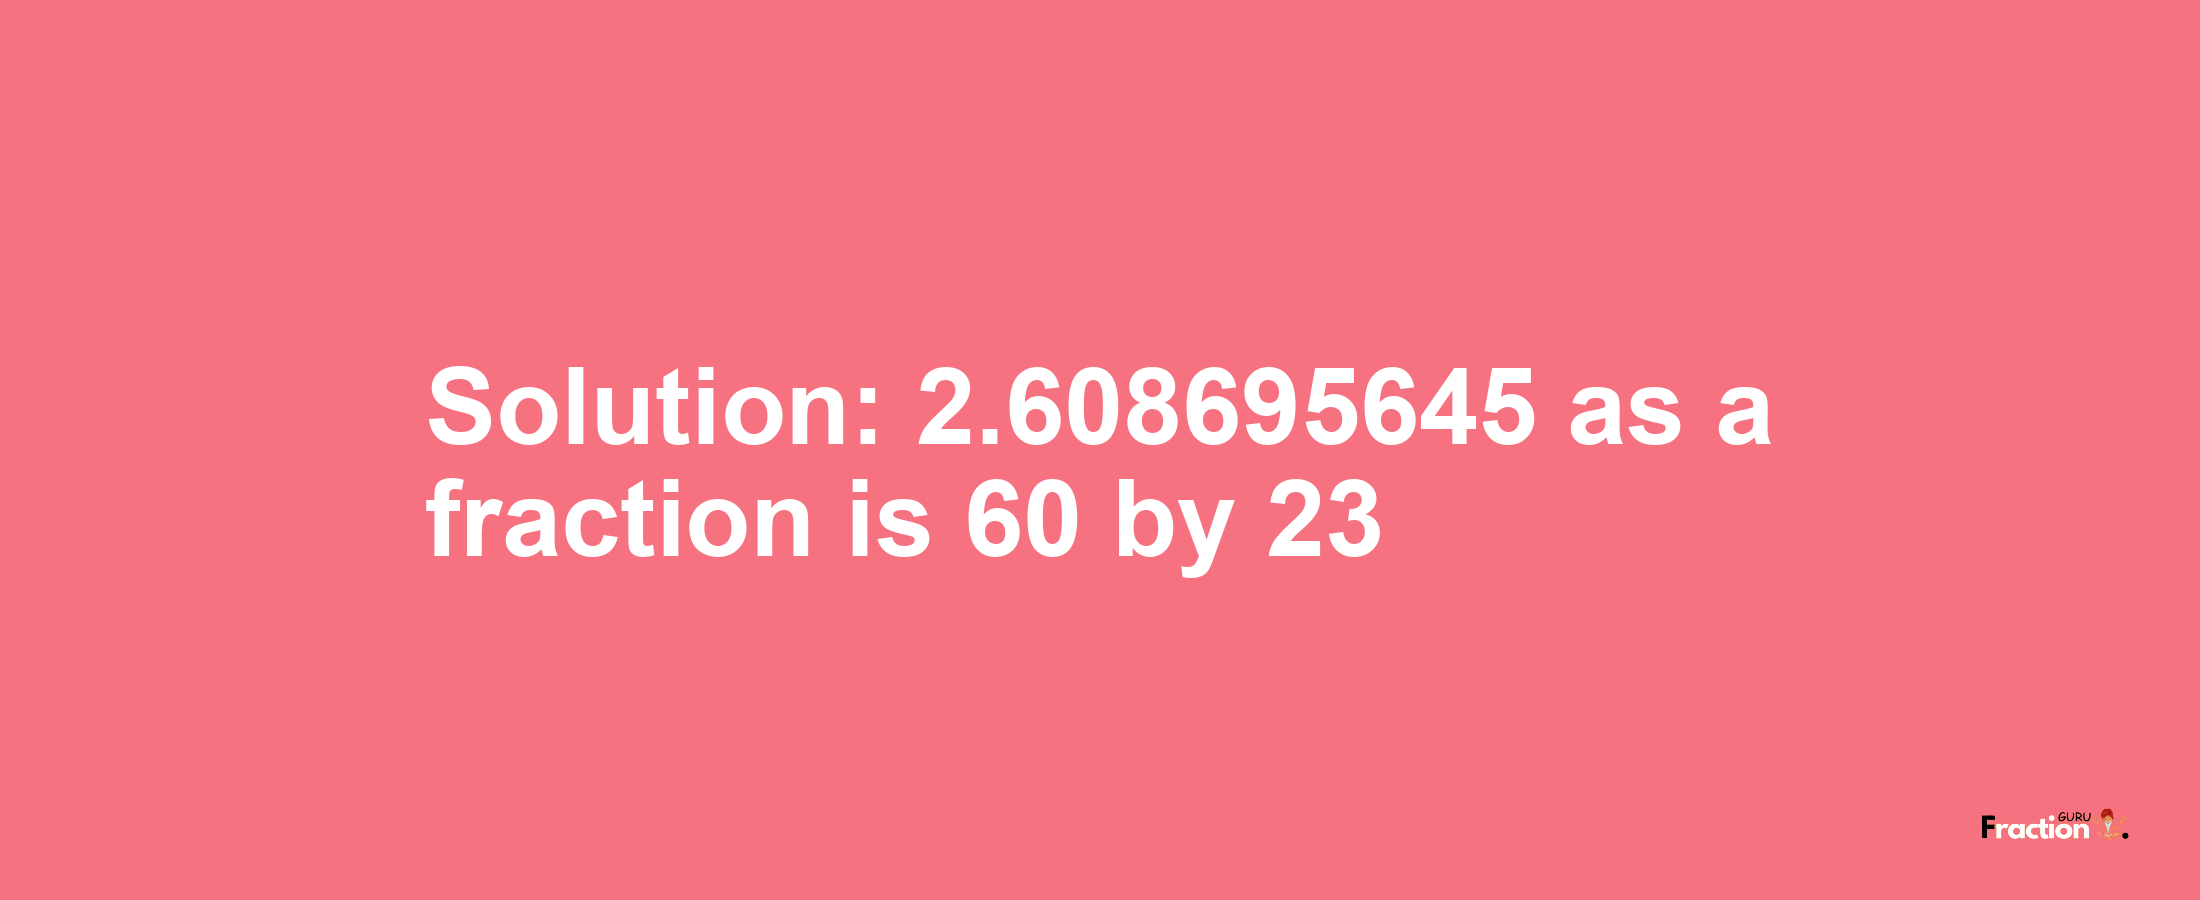 Solution:2.608695645 as a fraction is 60/23